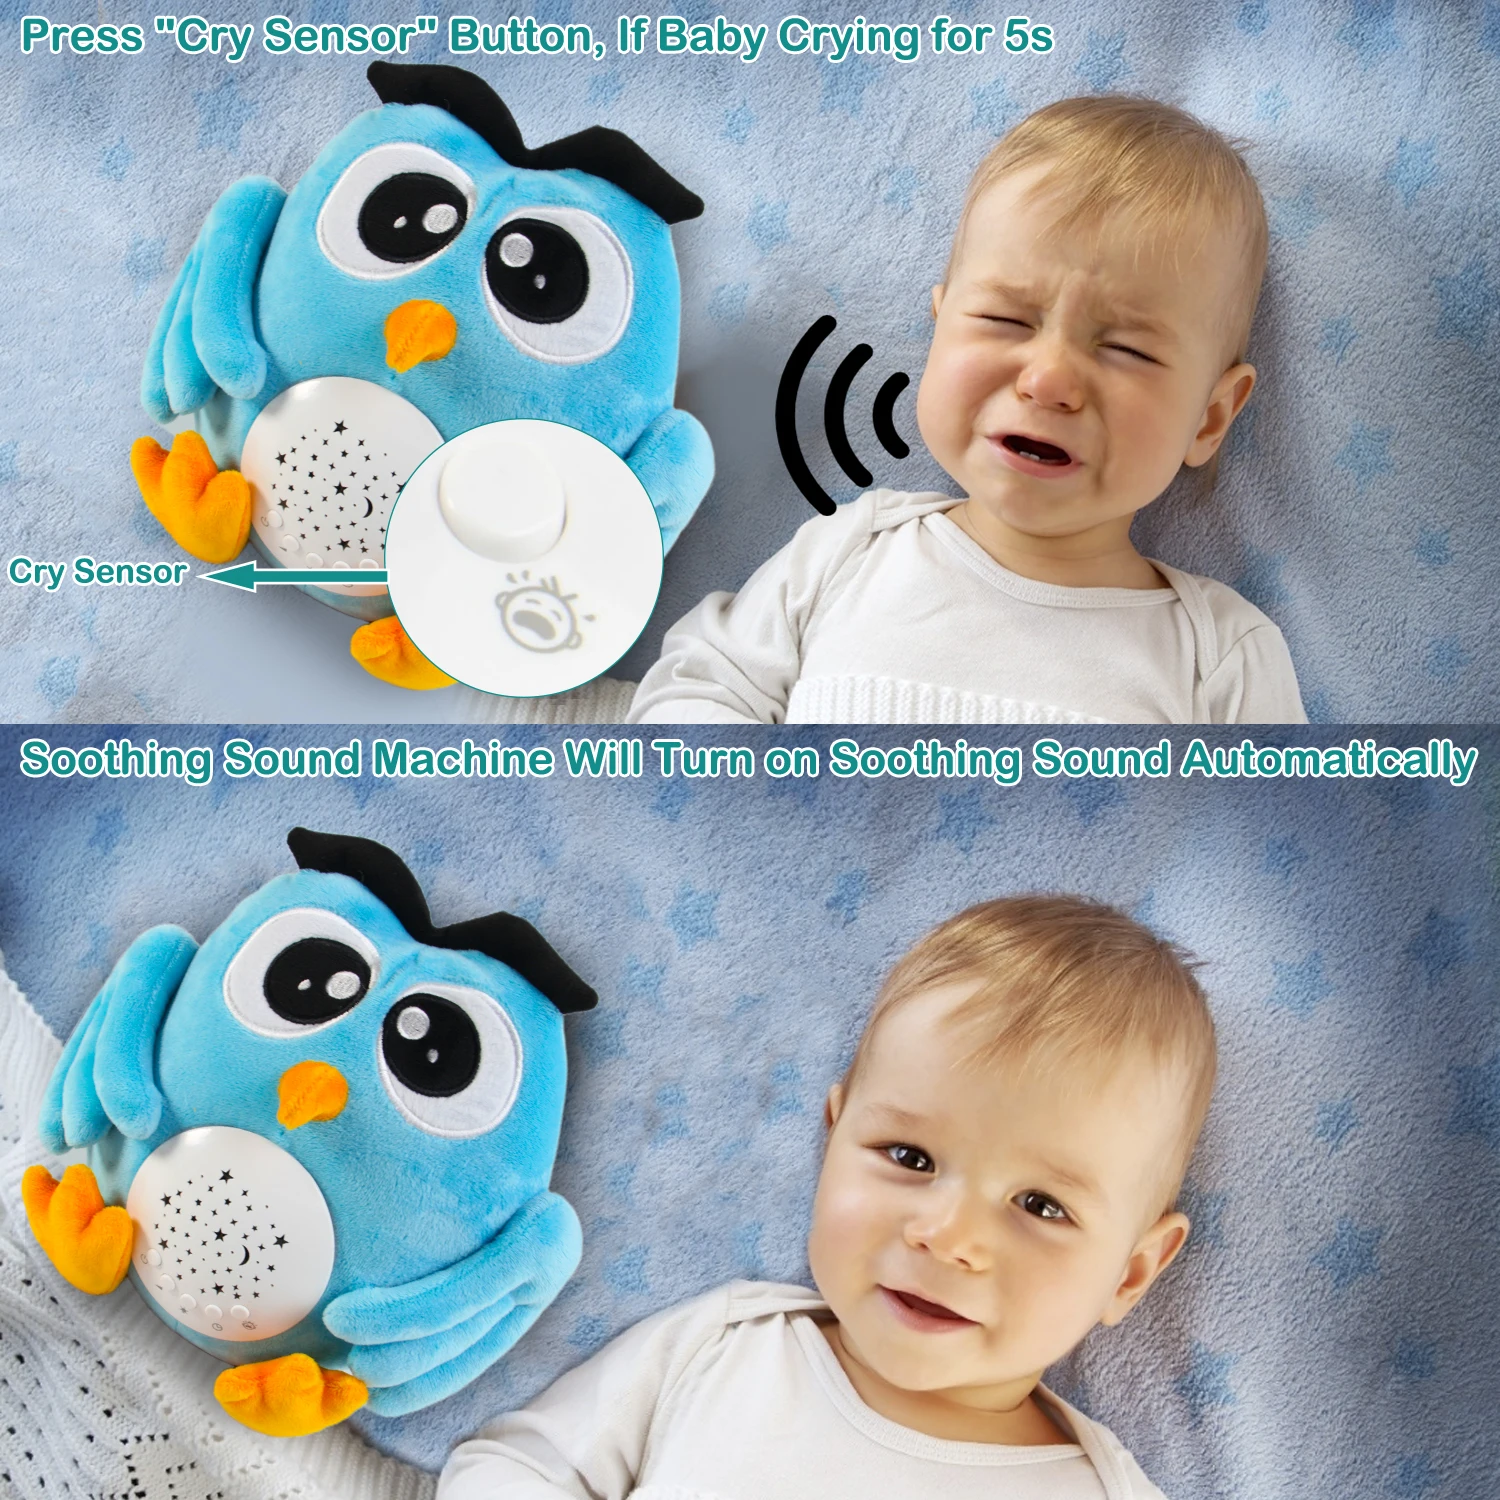 Baby sleeping therapy machine owl plush toys soothing withe noise sound machine with star night light projector